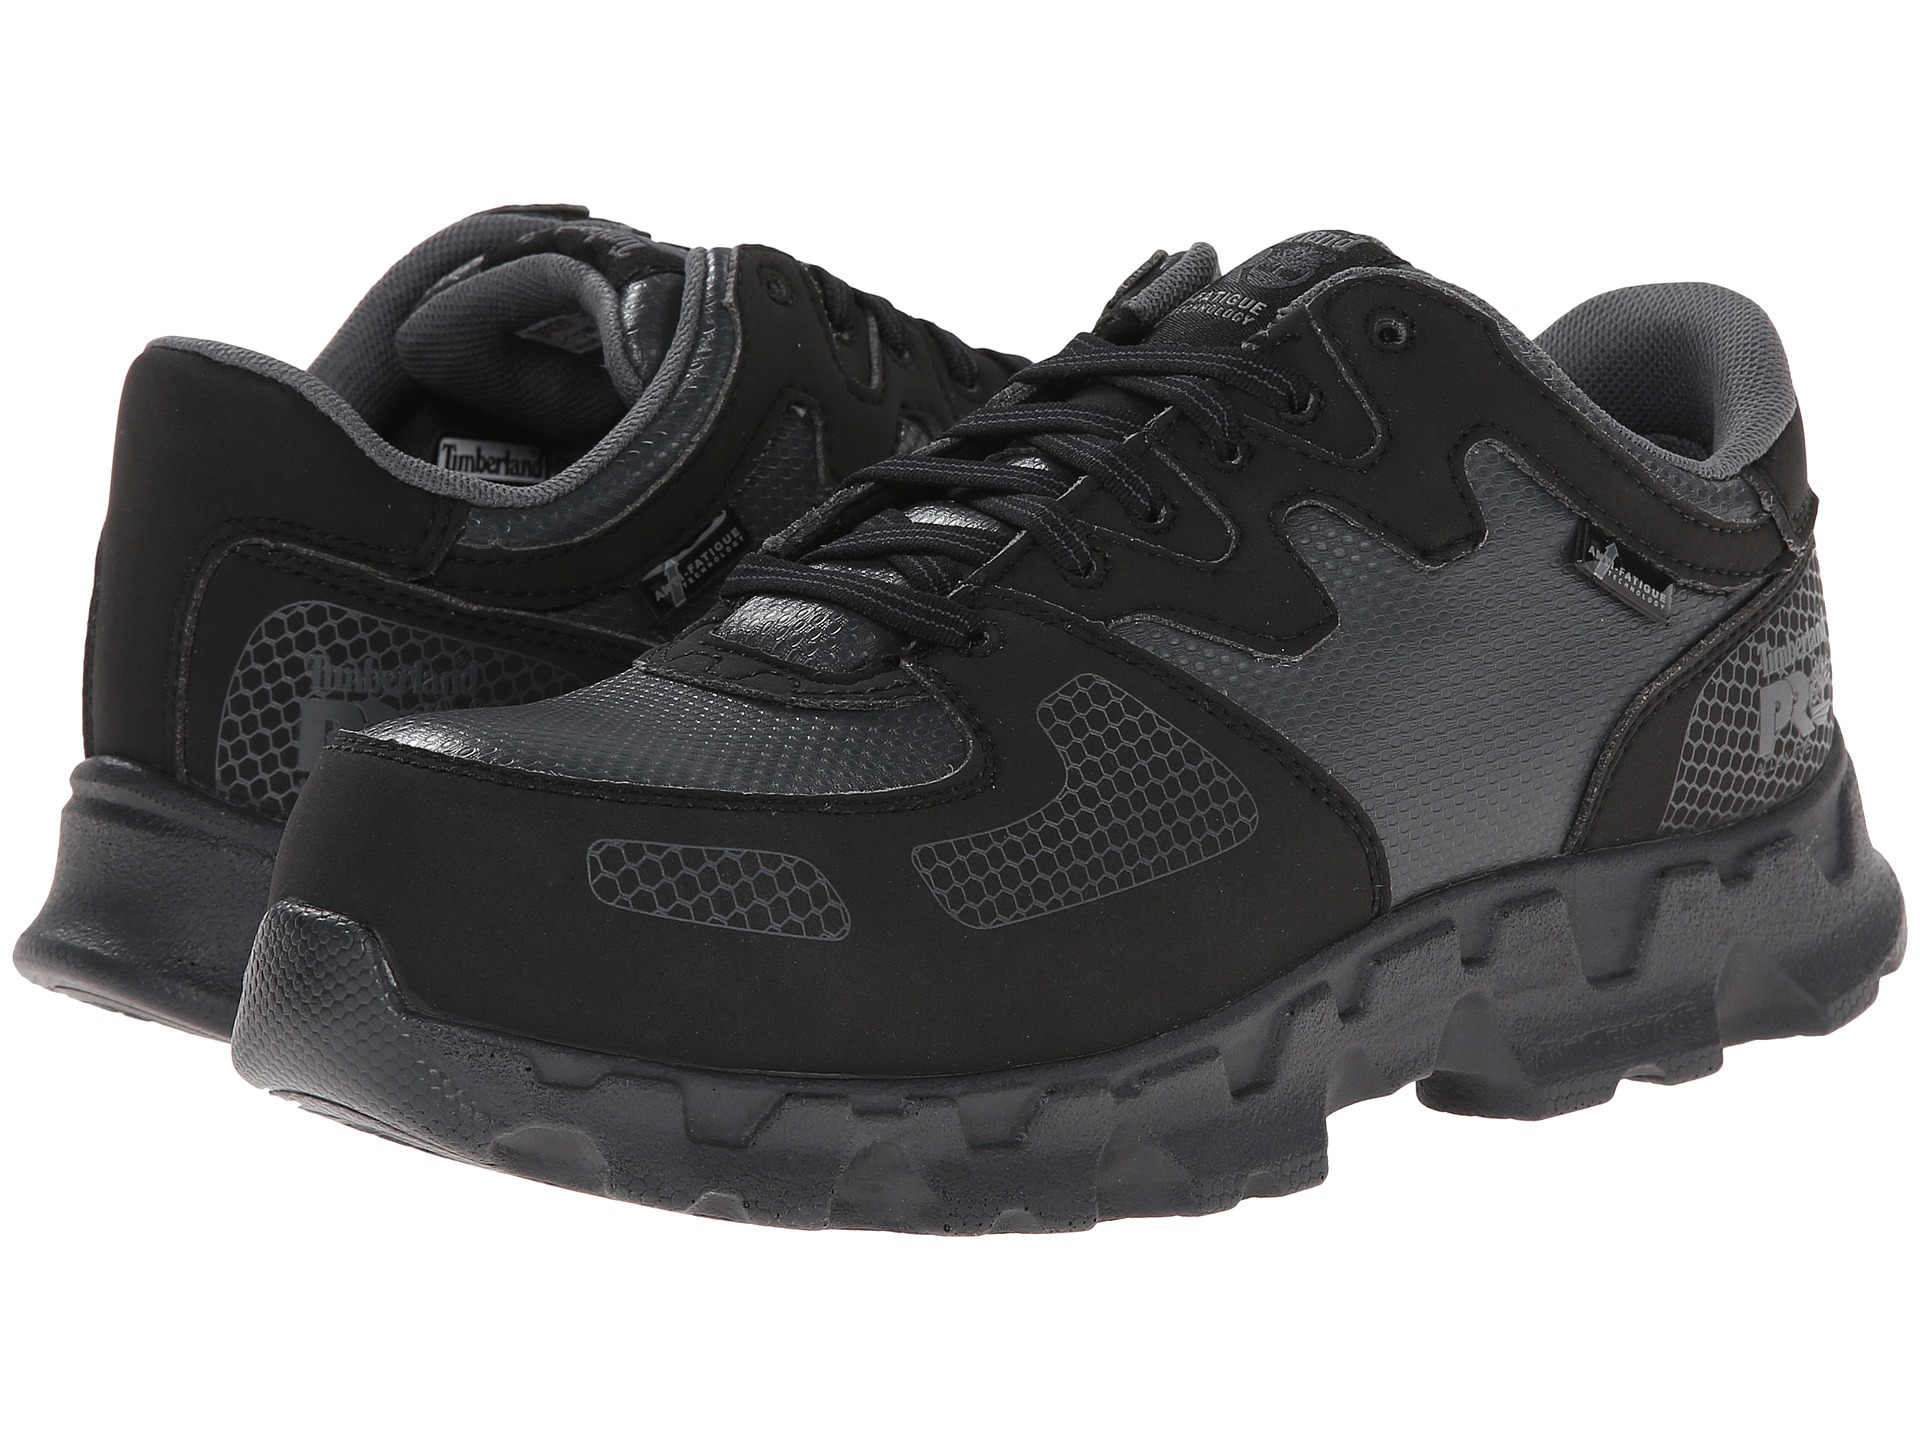 Timberland PRO Powertrain Alloy Safety Toe ESD at Zappos.com